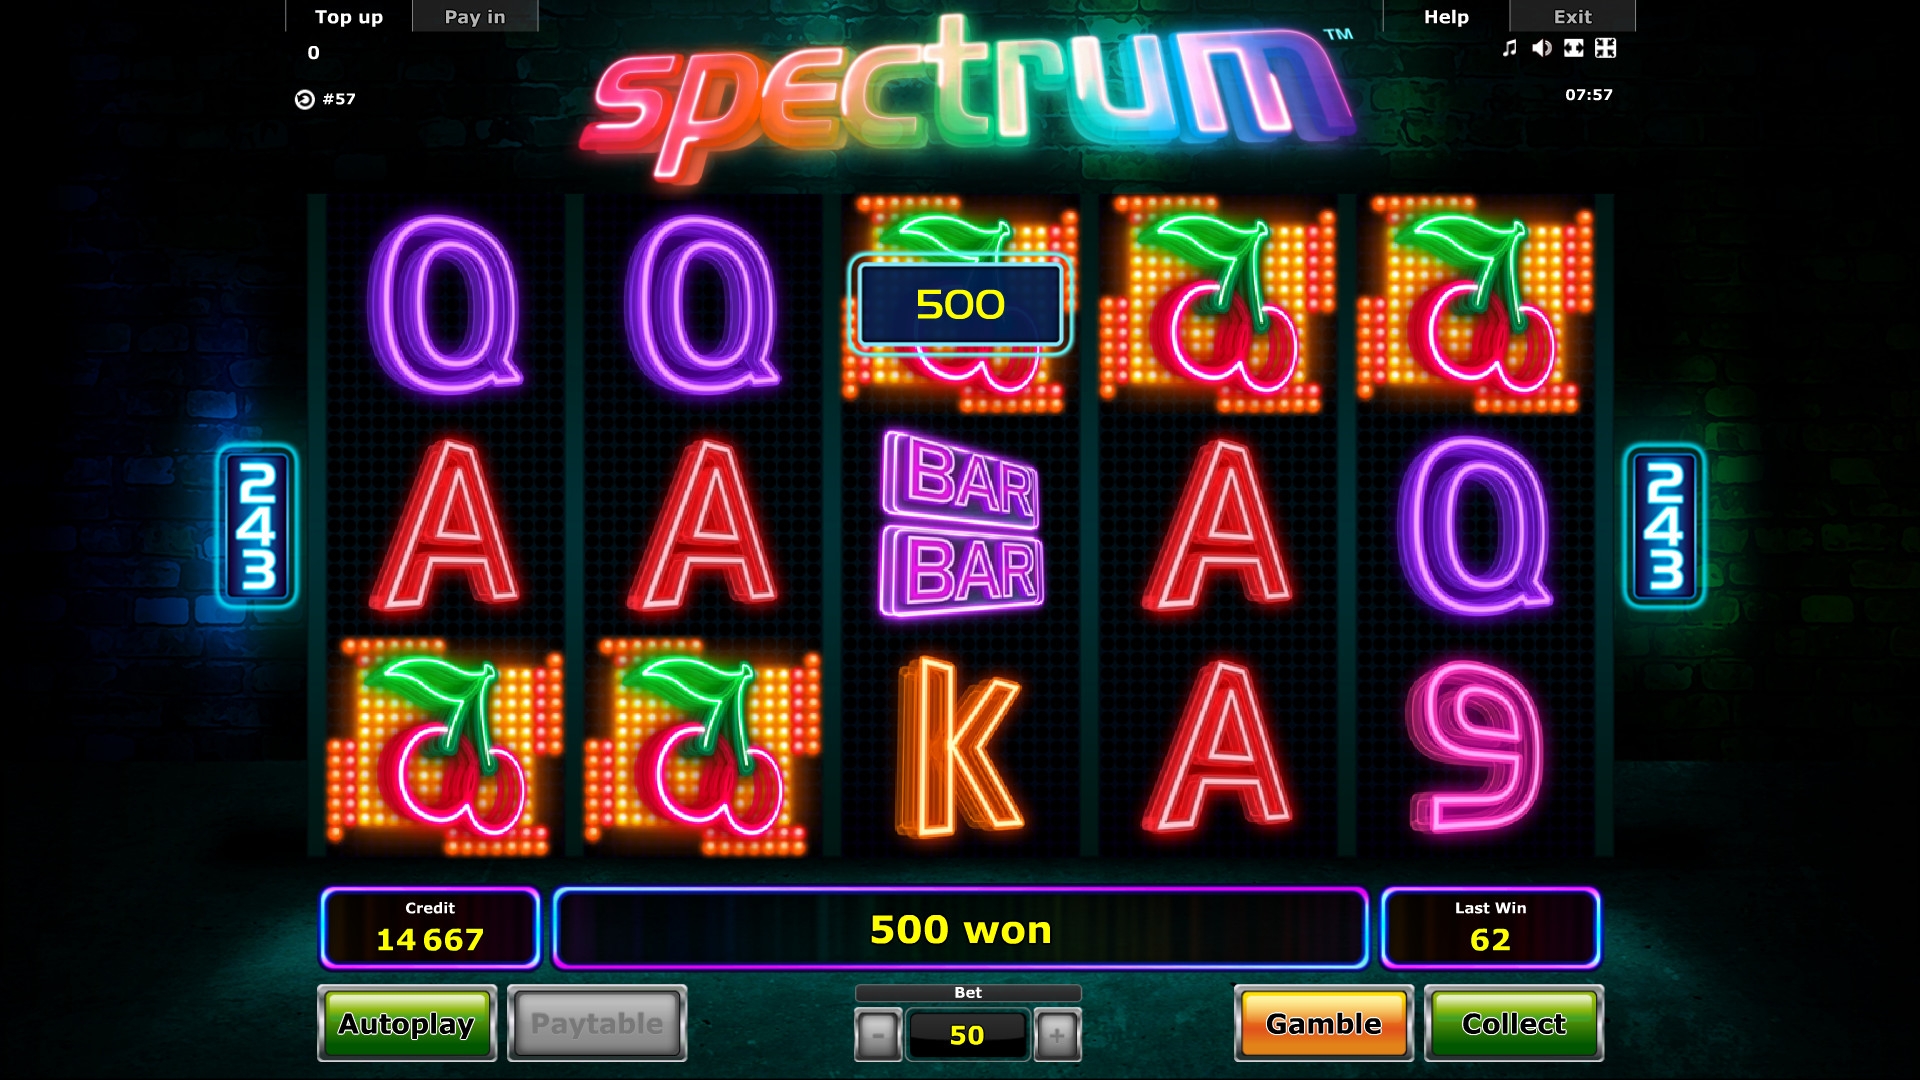 Spectrum (Spectrum) from category Slots